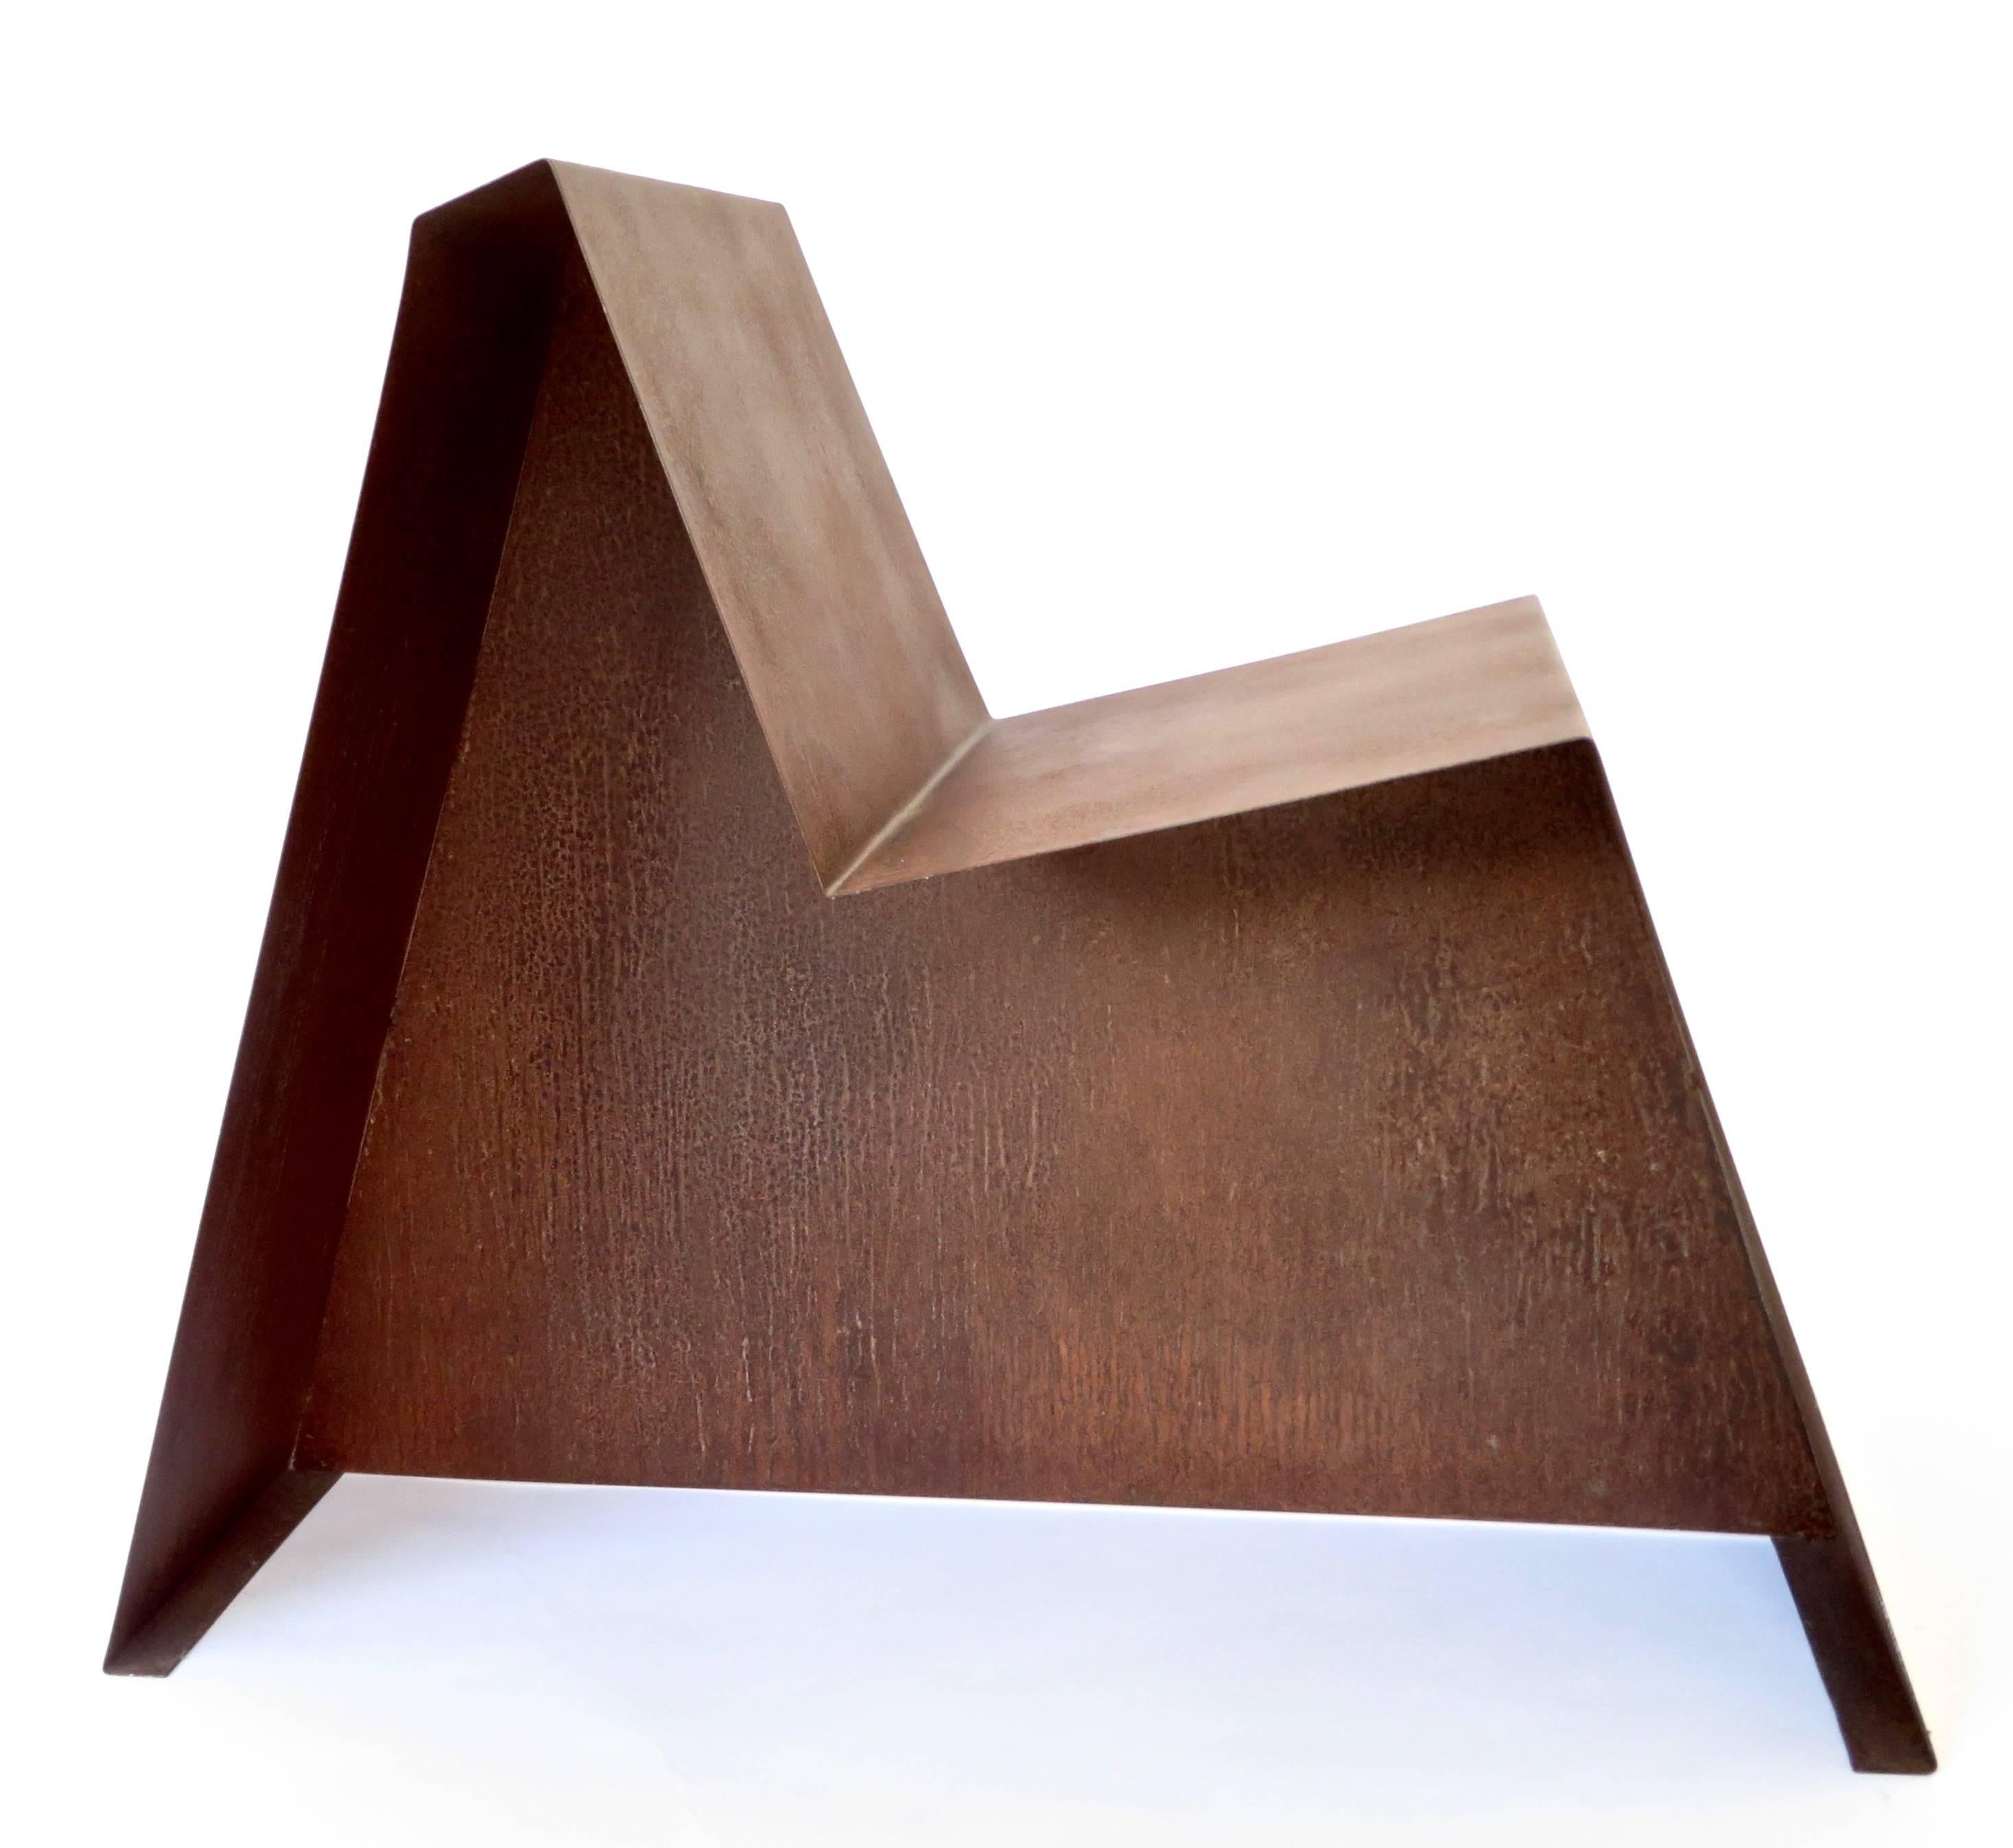 Folded sheet metal rusted steel sculptural chair by Hannah Vaughan. 
Hannah Vaughan was born in Los Angeles, CA to a bookbinder and an artist. Hannah attended Oberlin College in Ohio where she majored in fine art and religion. She continued her